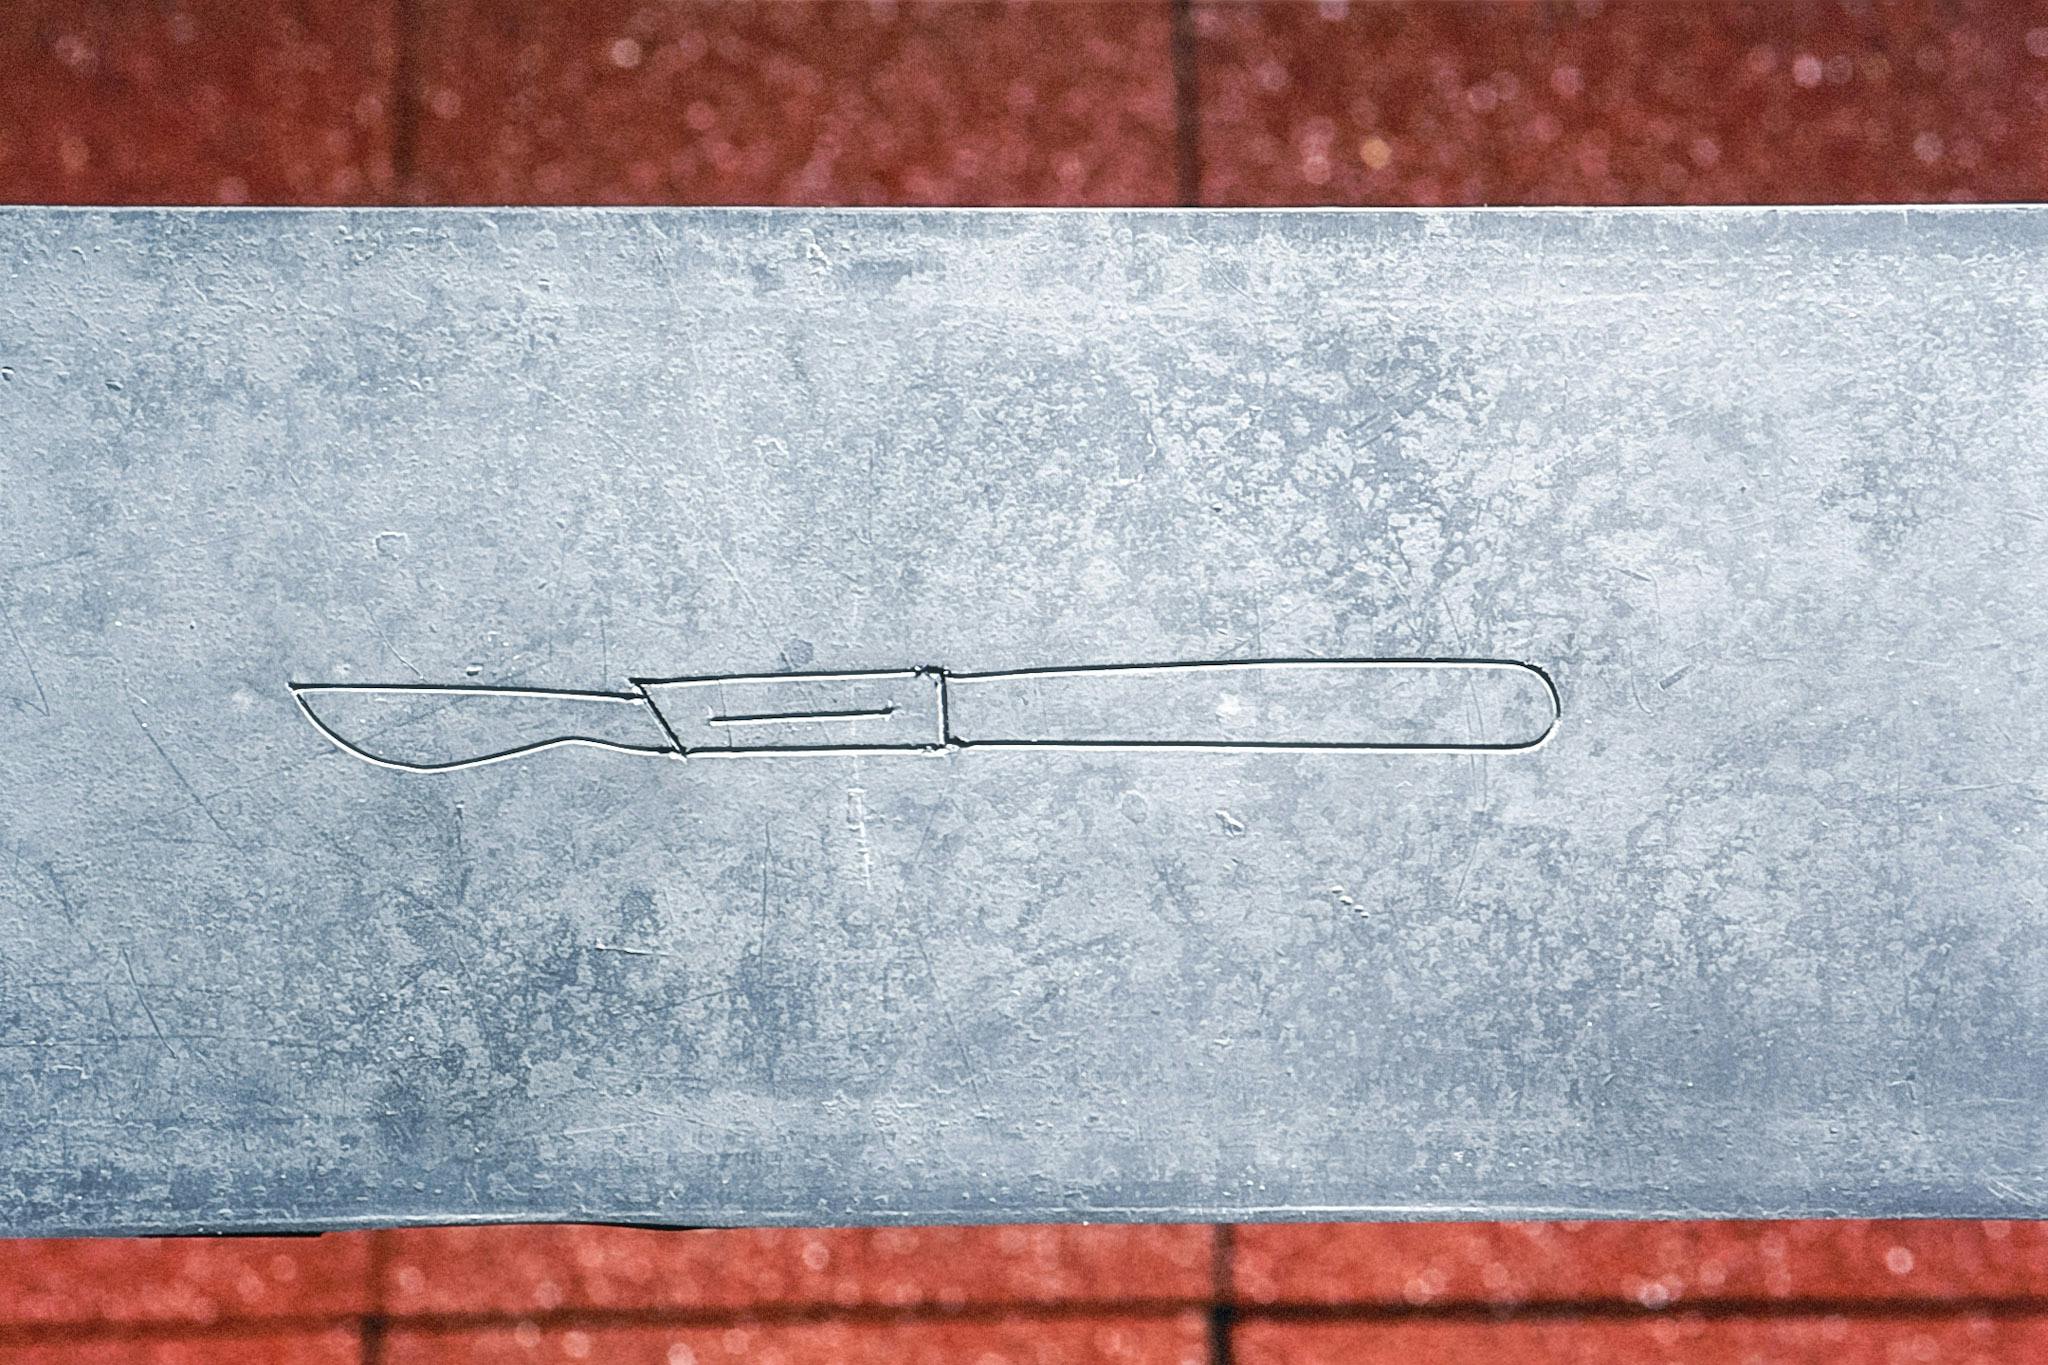 A shape of a small carving knife is carved on the metal surface above the floor covered by the rubber tiles. The depicted knife looks skinny and half of its entire body is made up of the handle. 